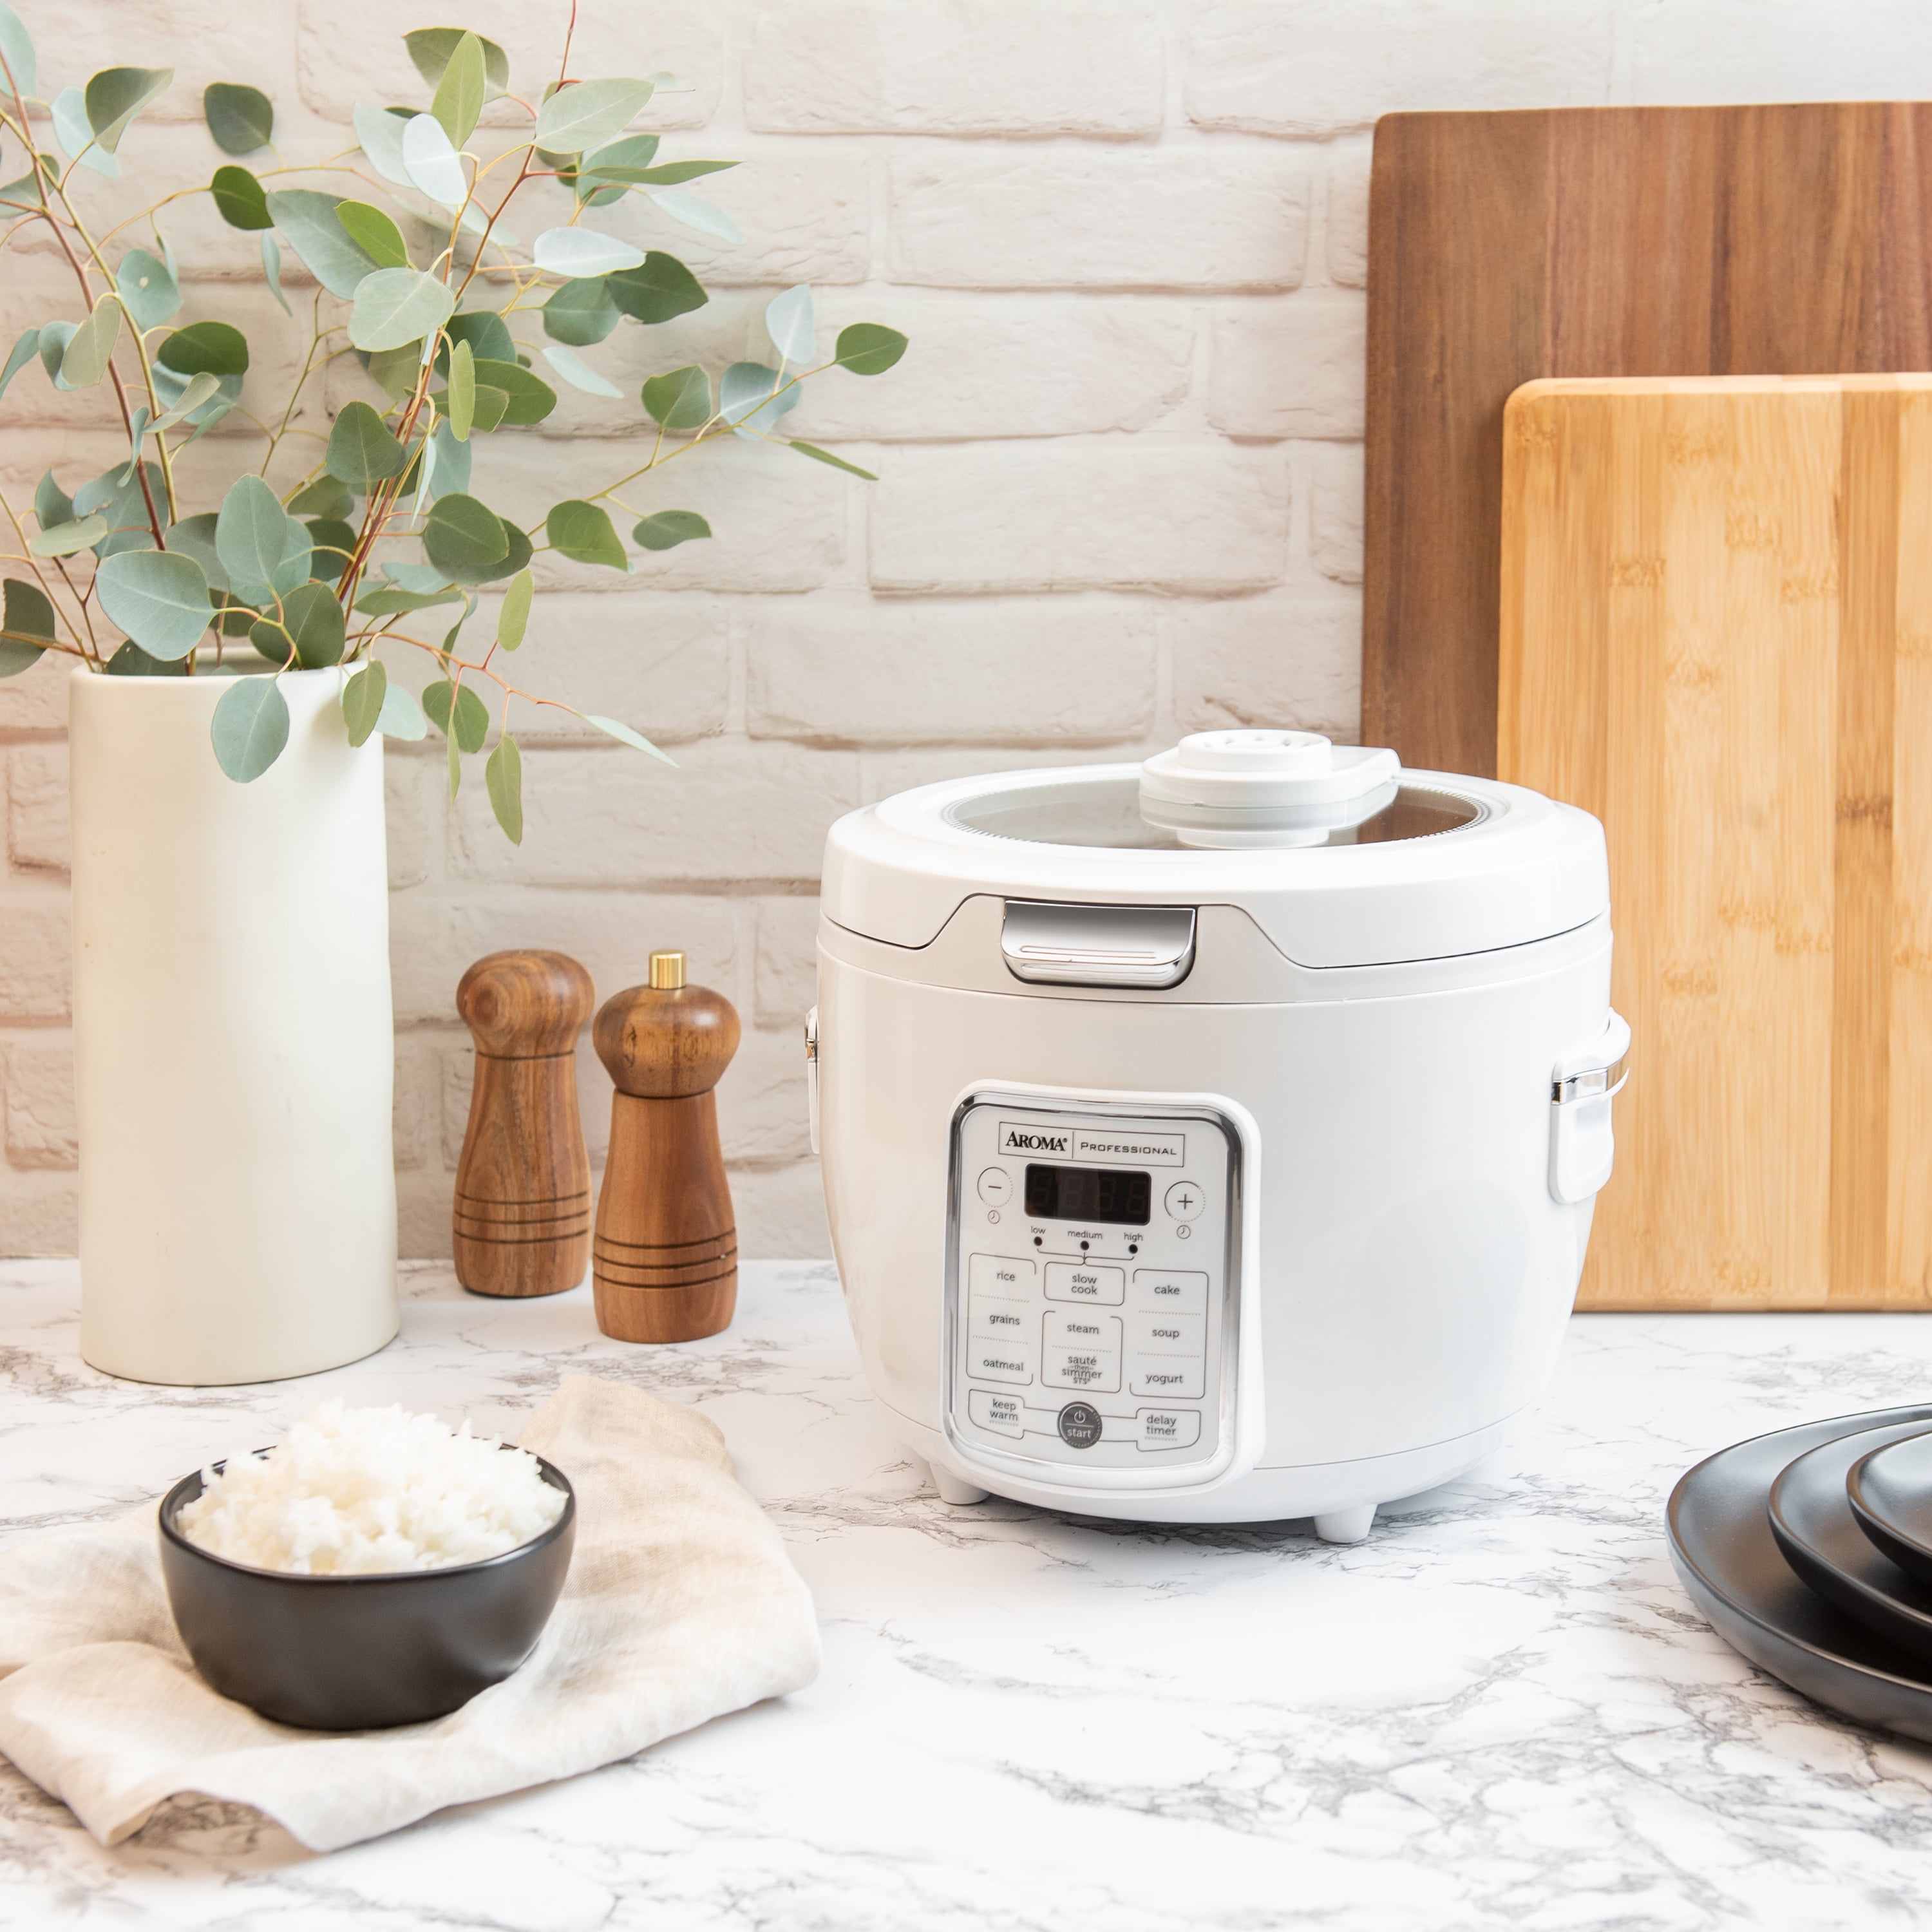 Aroma 20 Cups Programmable Residential Rice Cooker in the Rice